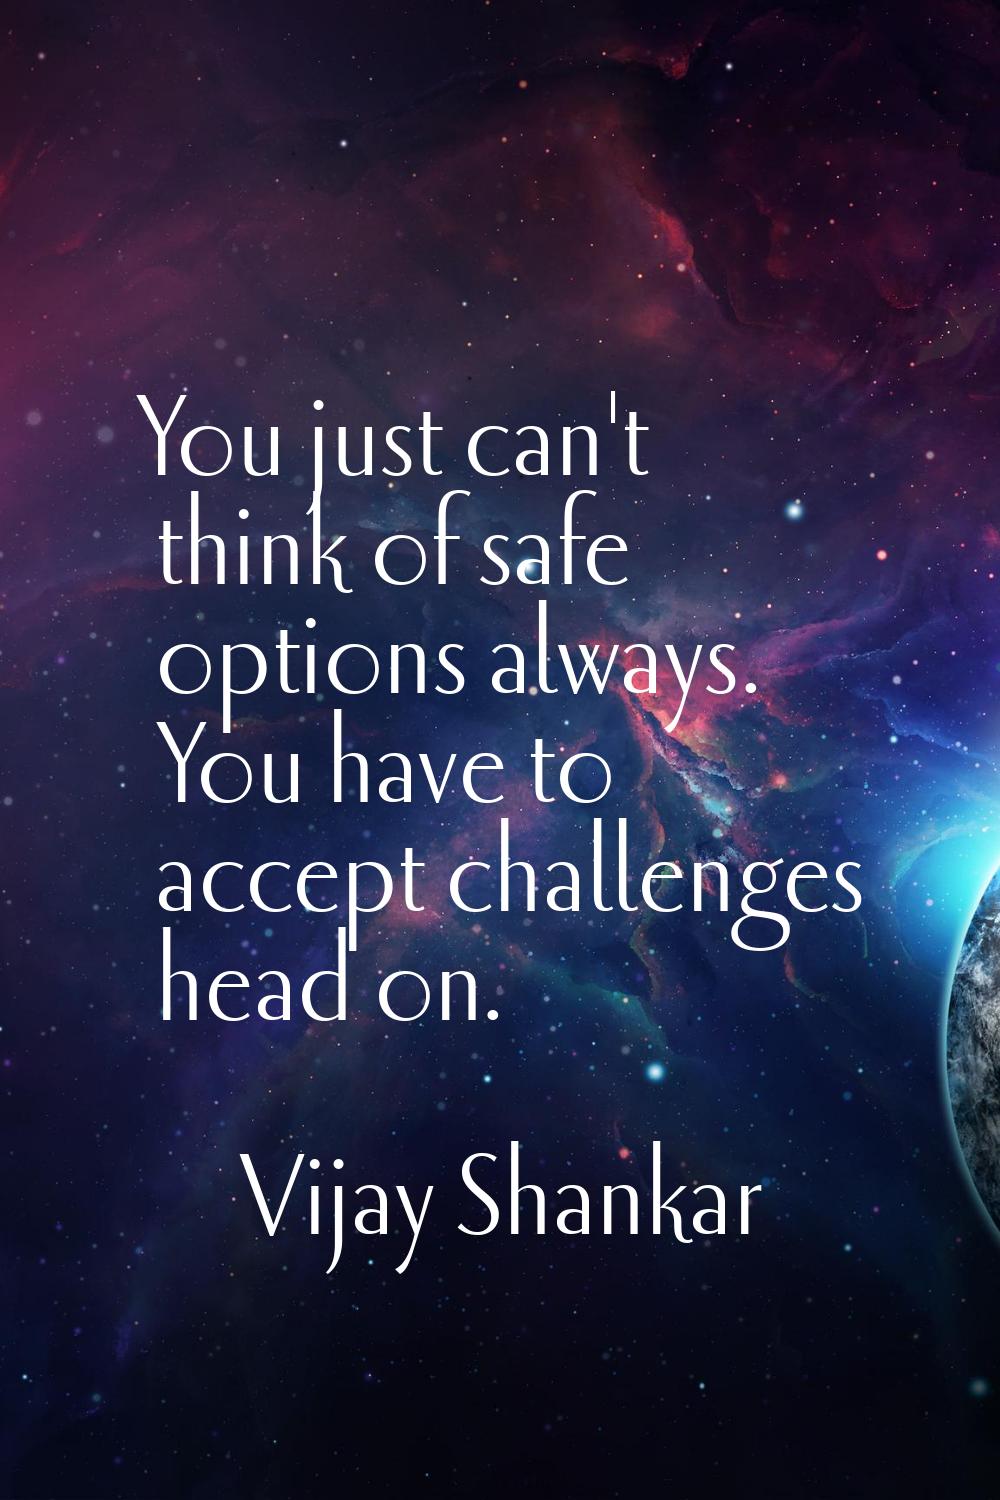 You just can't think of safe options always. You have to accept challenges head on.